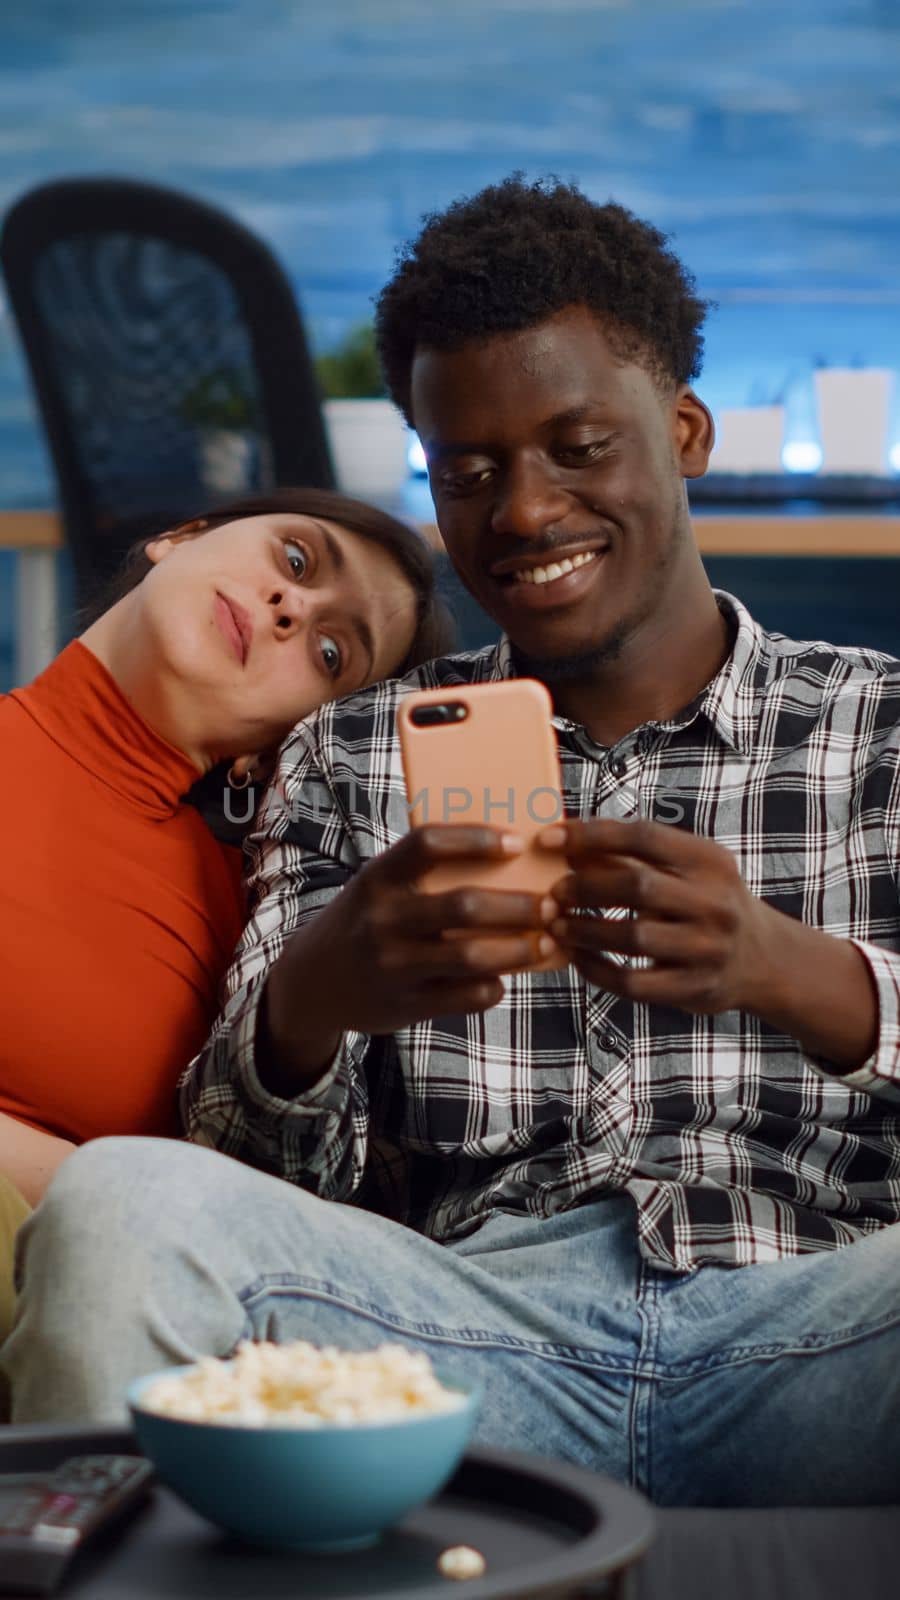 Joyful interracial couple taking selfies with smartphone while sitting together on living room sofa. Cheerful multi ethnic people having fun with pictures and technology at home